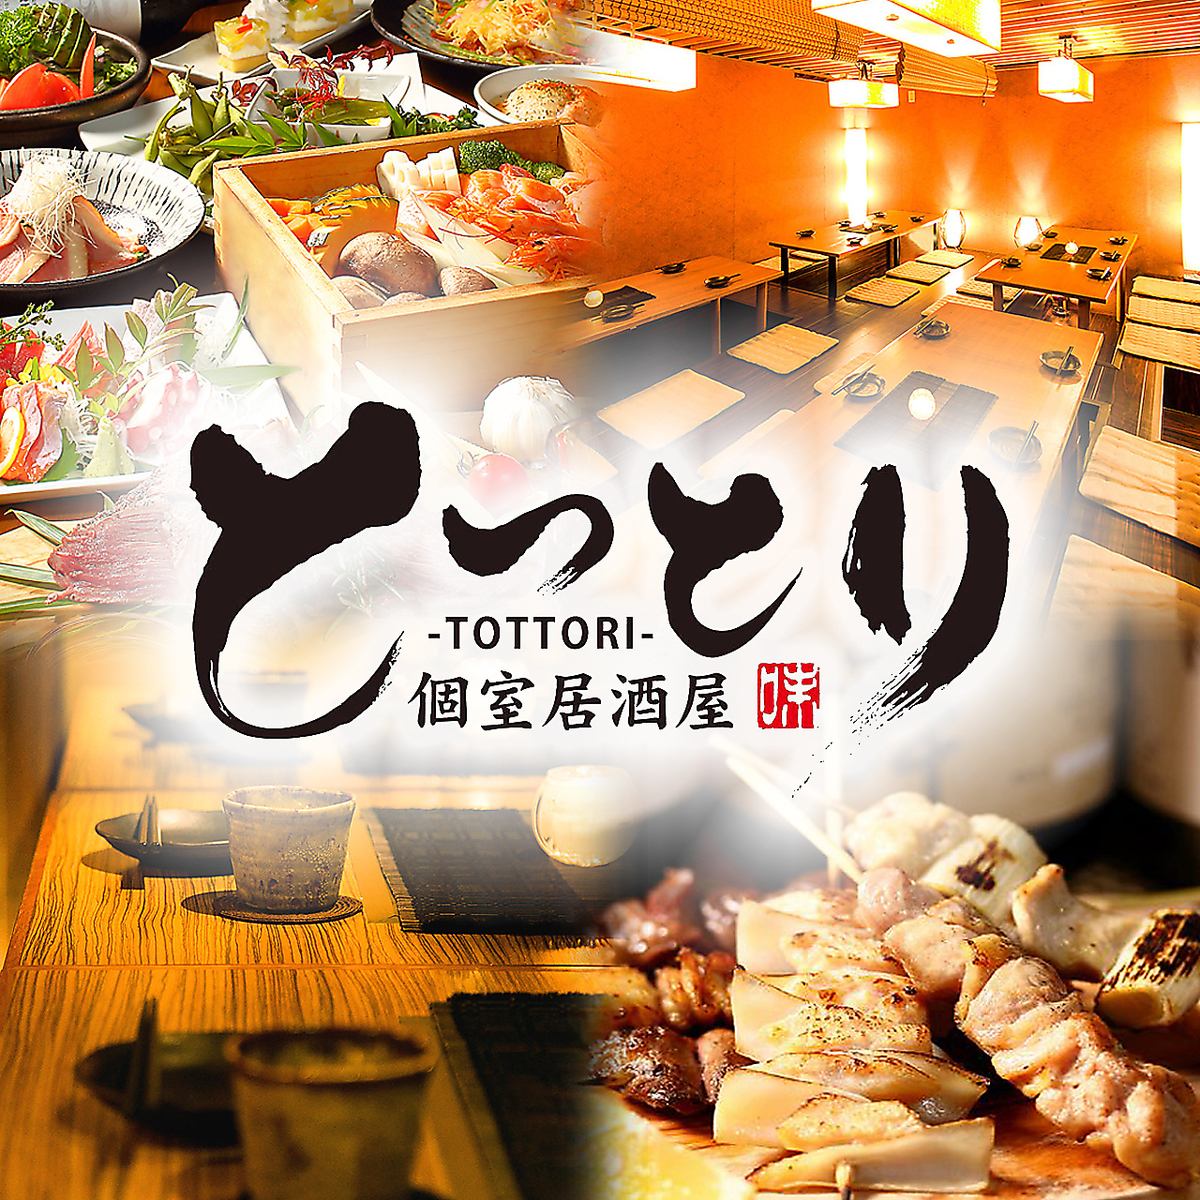 [2-minute walk from Shinjuku Station] All-you-can-eat meat sushi! All-you-can-eat and drink course from 3,300 yen!